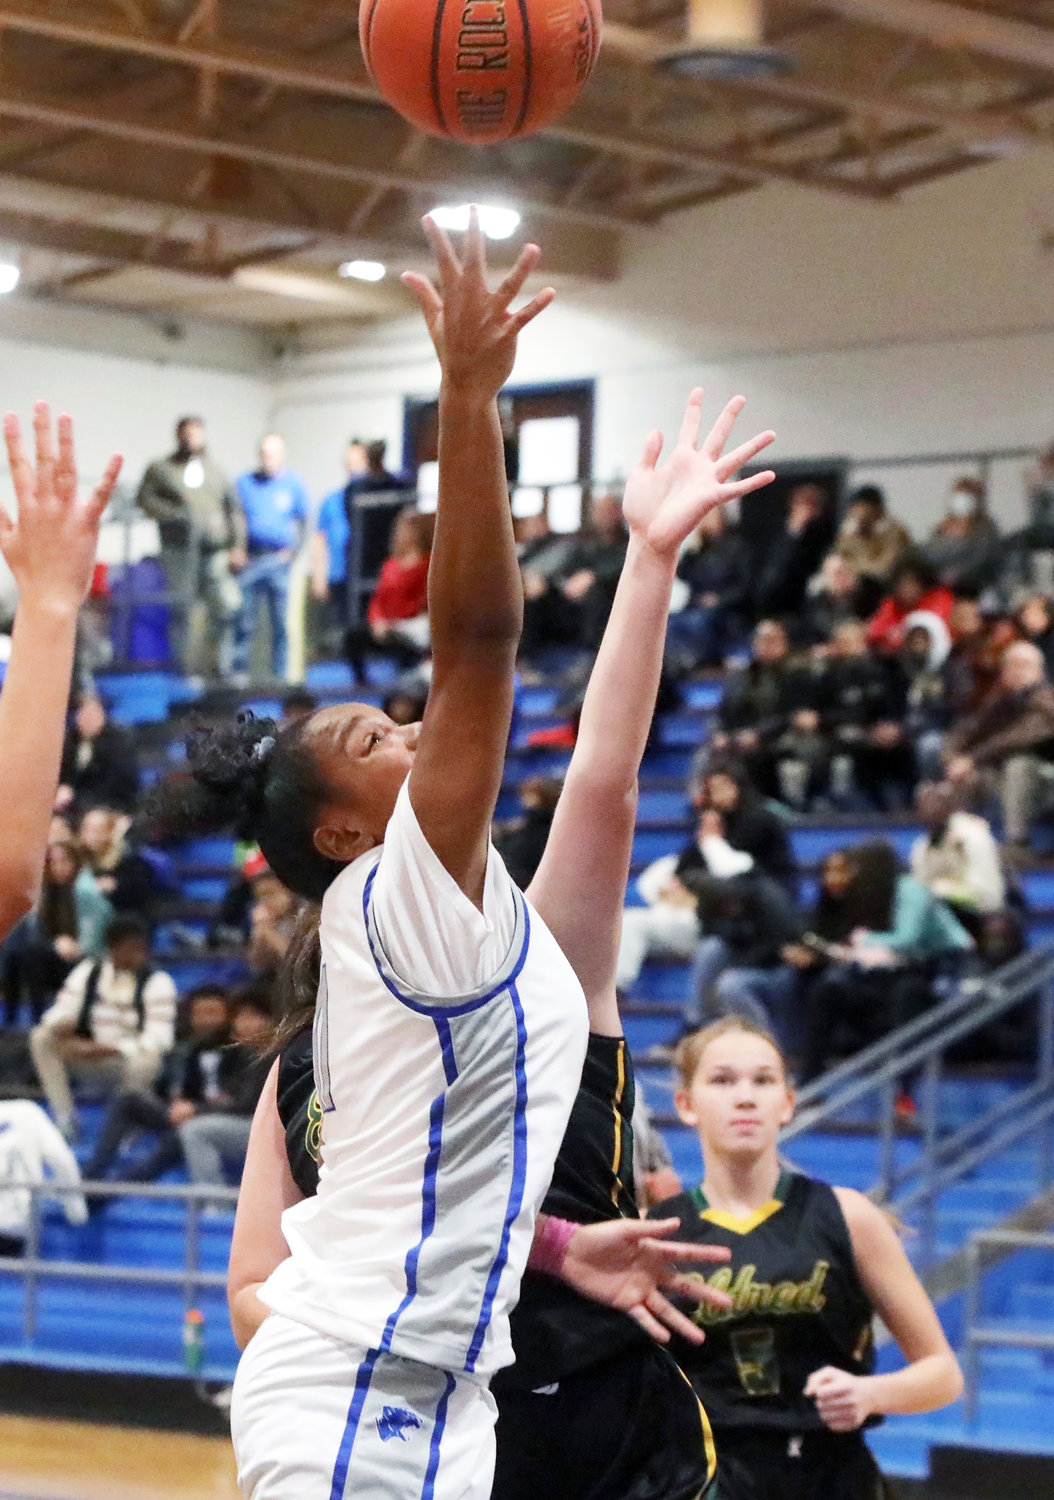 Monticello senior Aaliyah Mota scores two of her game-high 13 points.